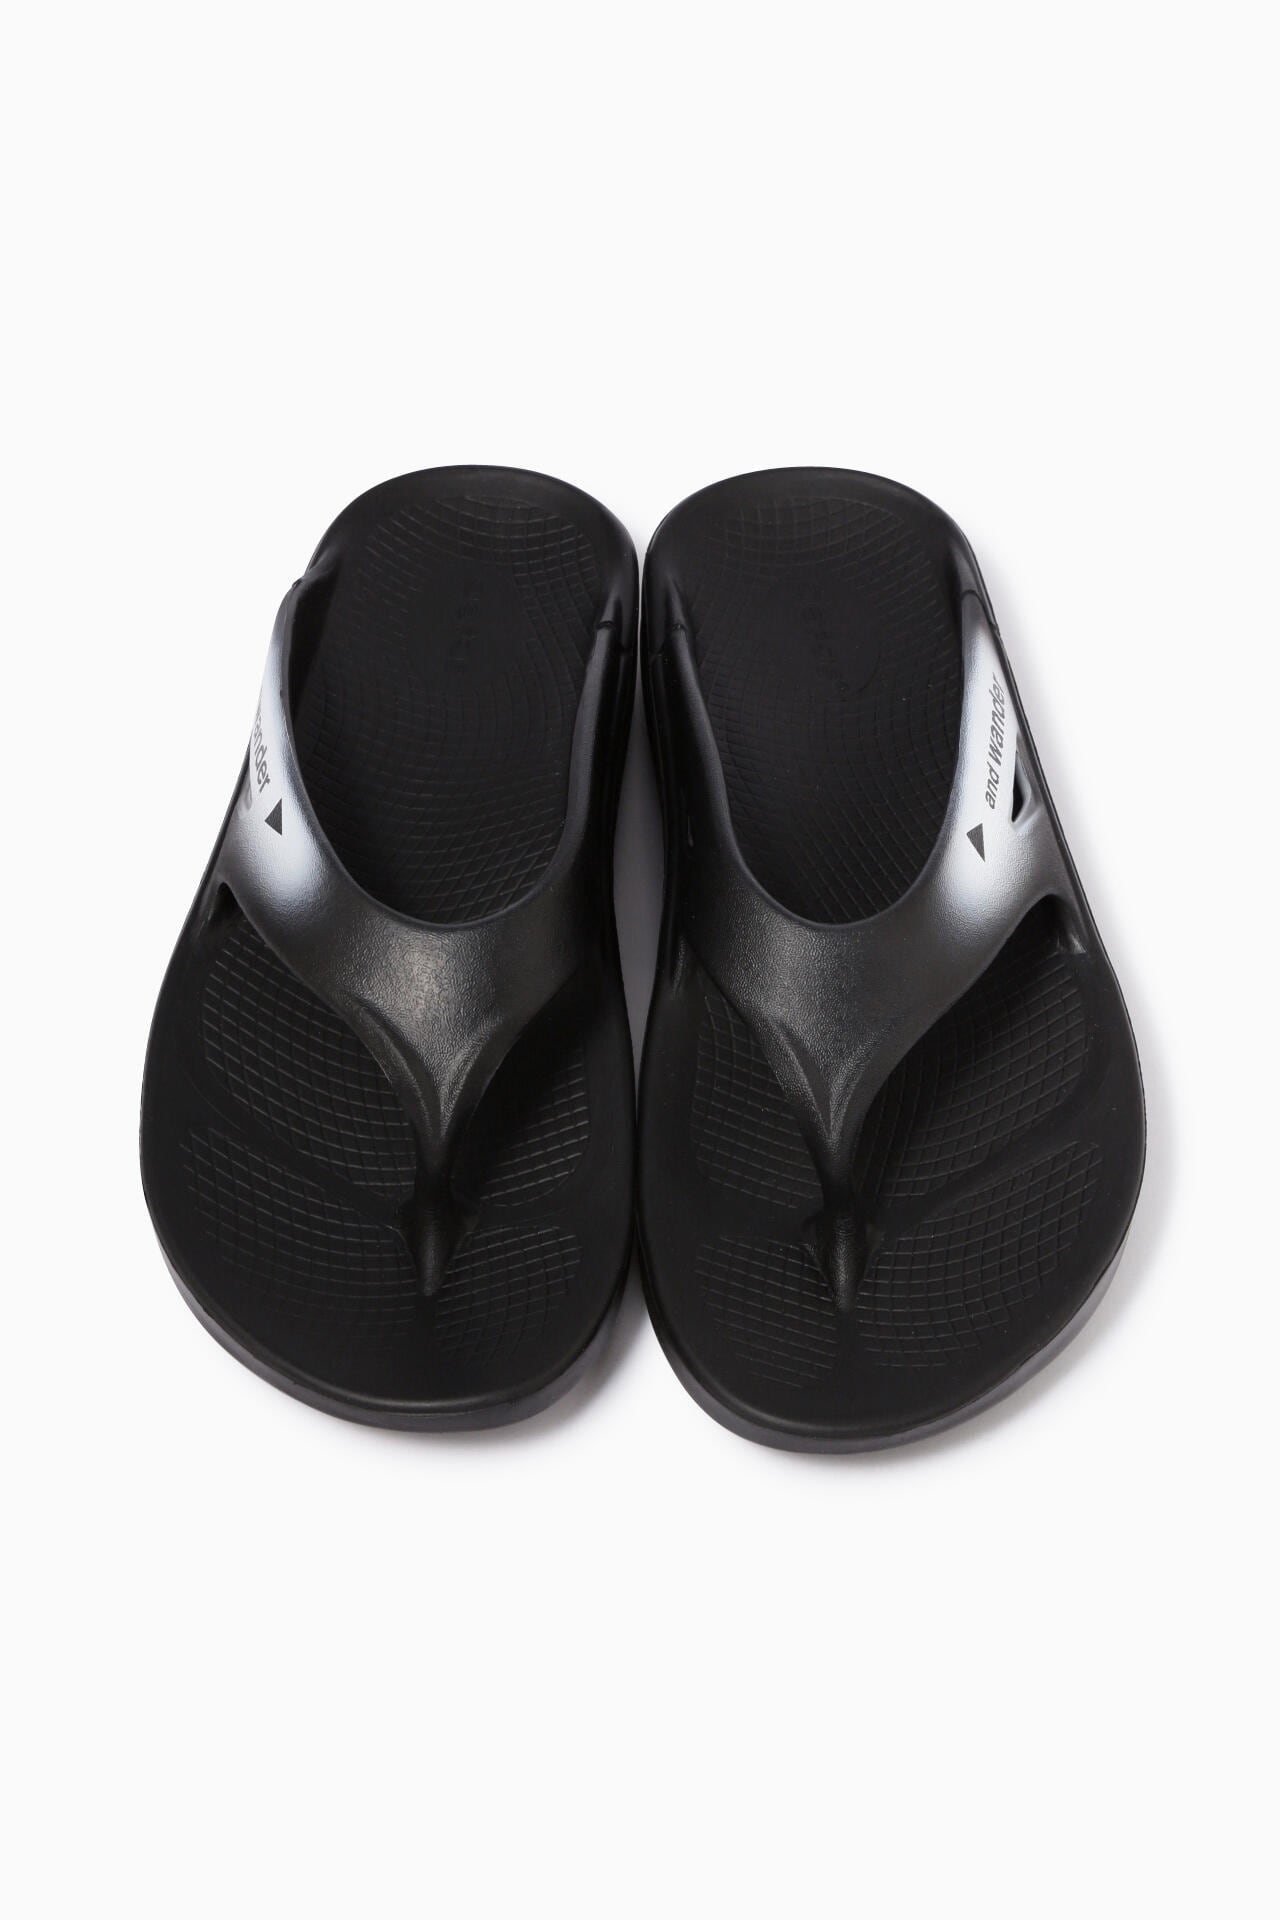 OOFOS original × and wander recovery sandal | footwear | and 